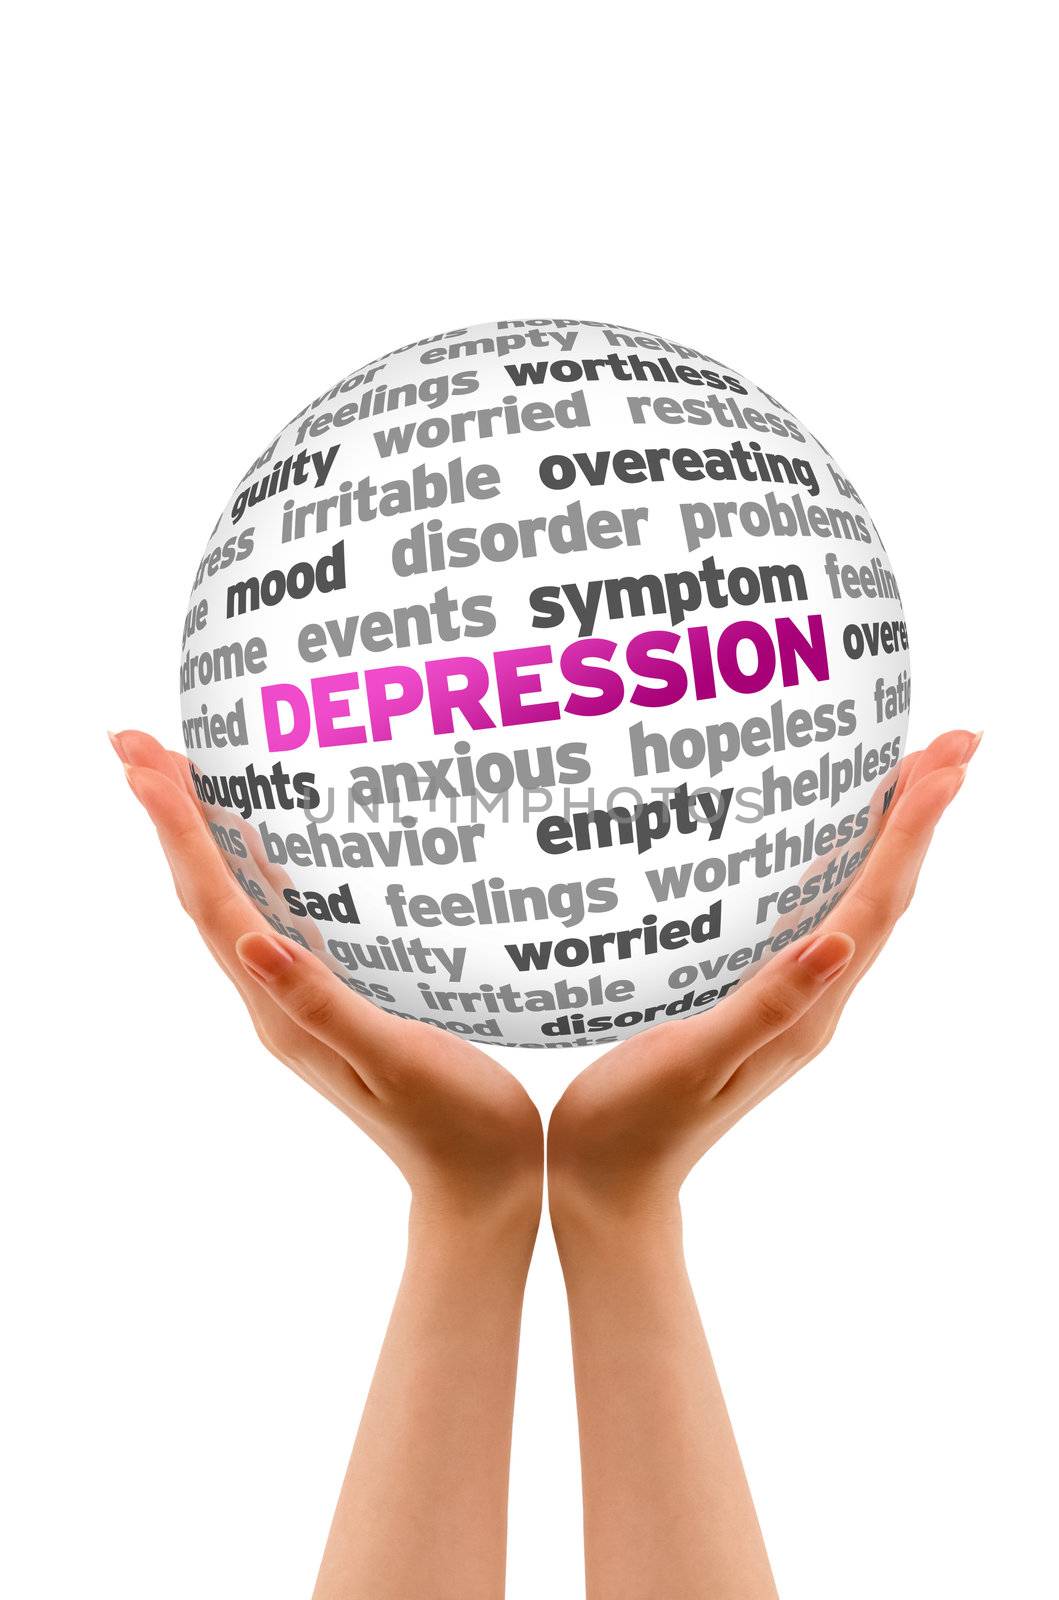 Hands holding a Depression Sphere sign on white background.